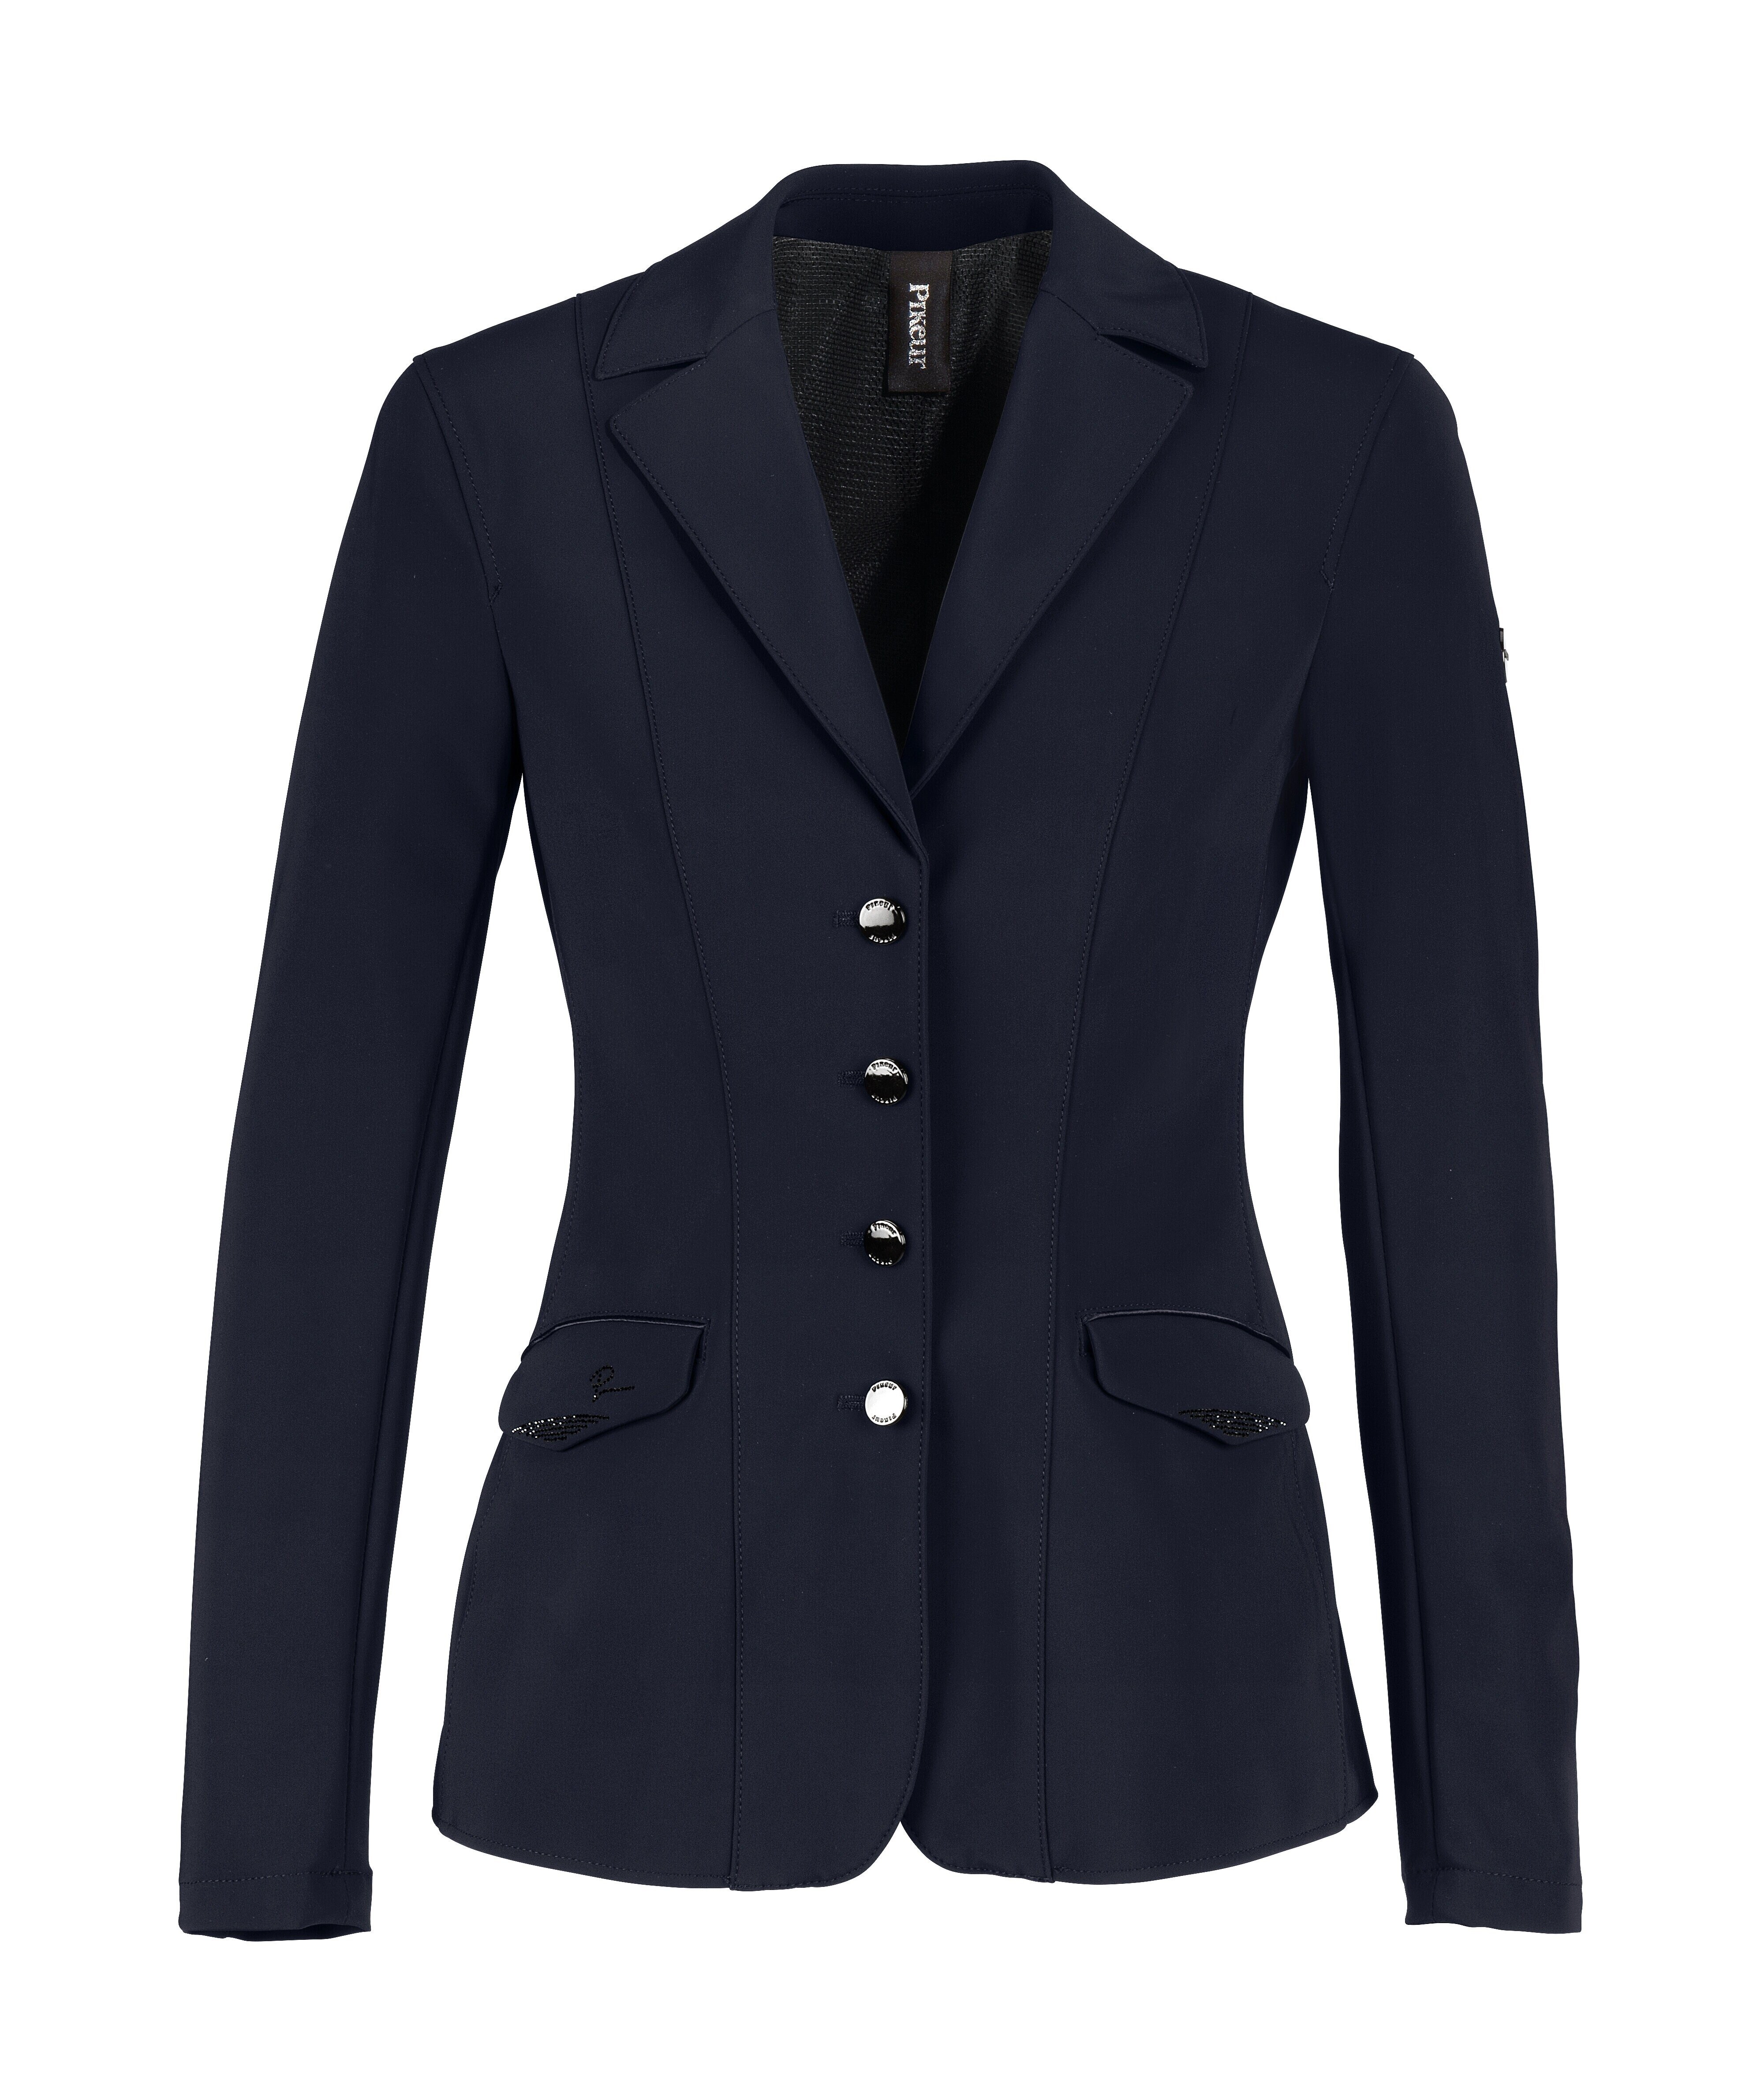 Isalie Competition Jacket - Navy